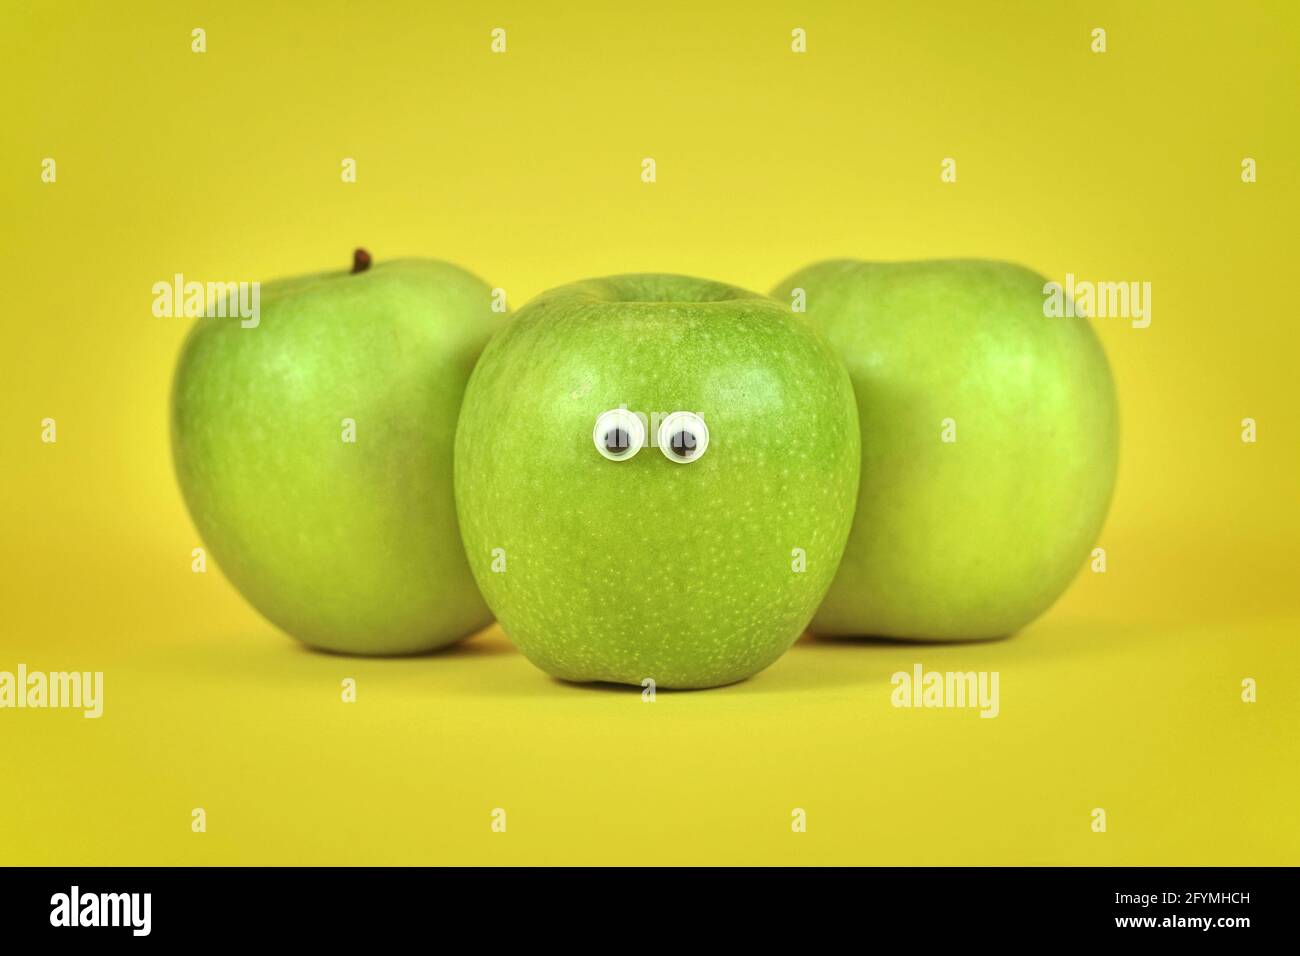 Green apple fruits with funny googly eyes on bright yellow background Stock Photo